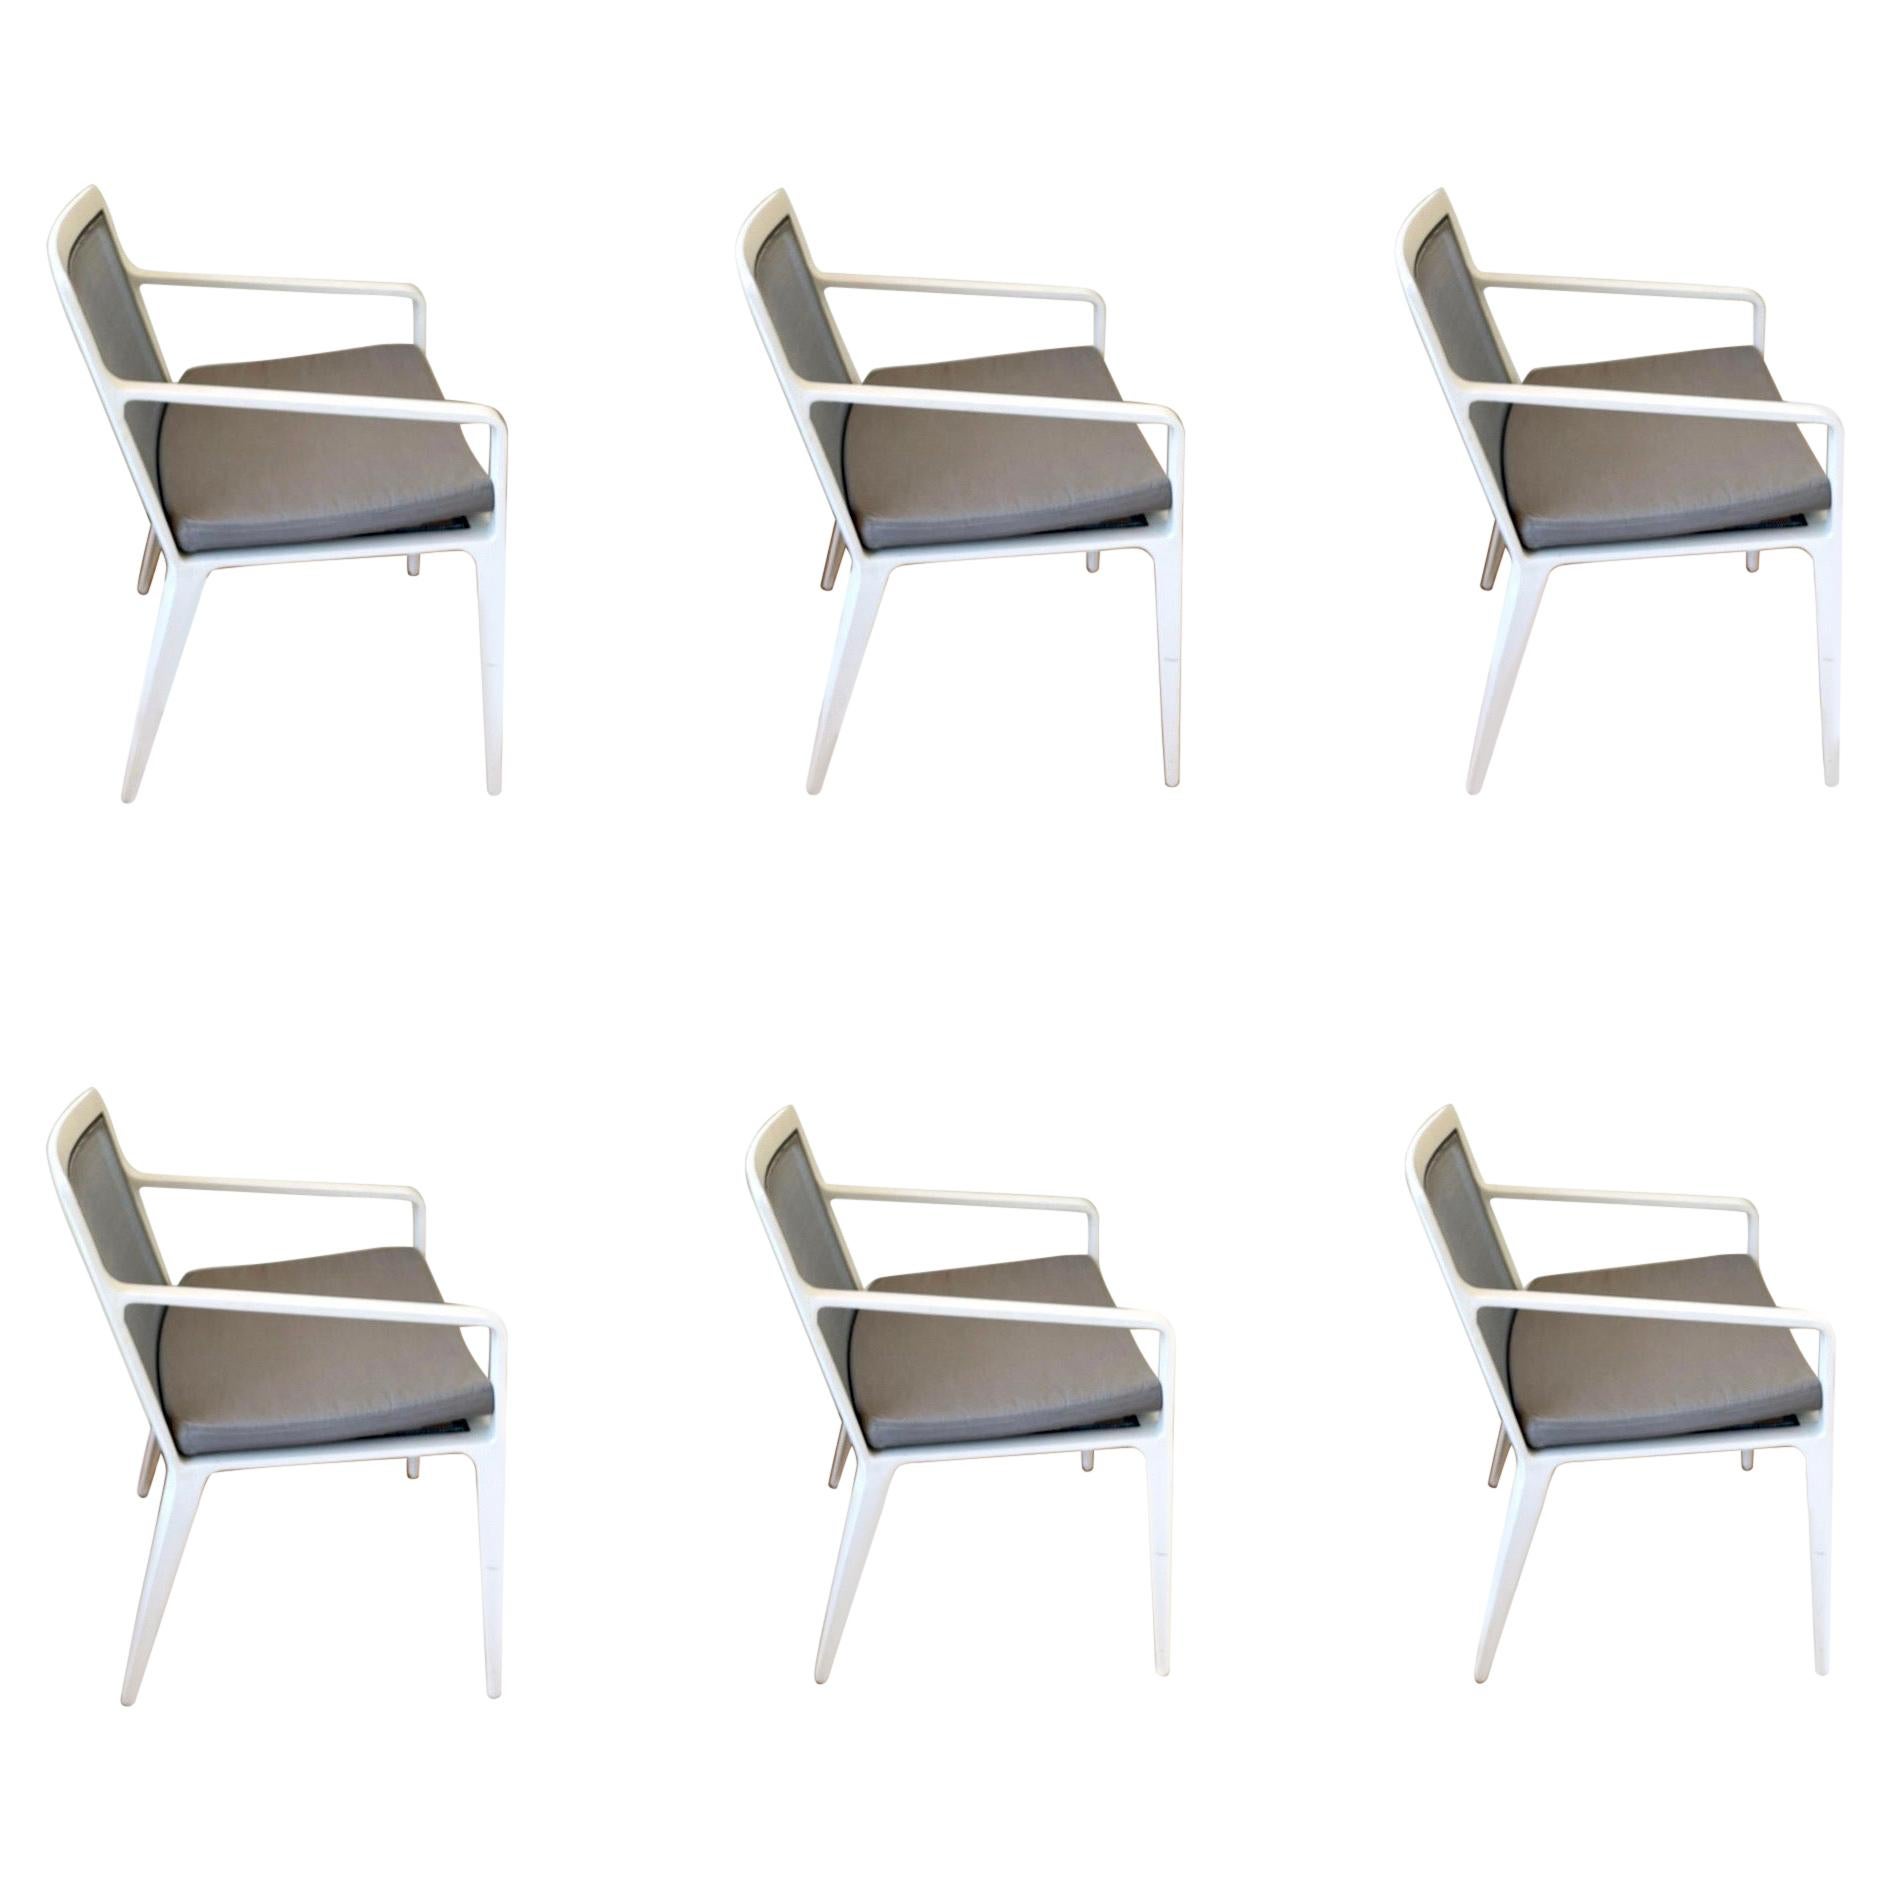 Set of 6 Still Arm Patio Chairs Designed by Richard Frinier for Brown Jordan